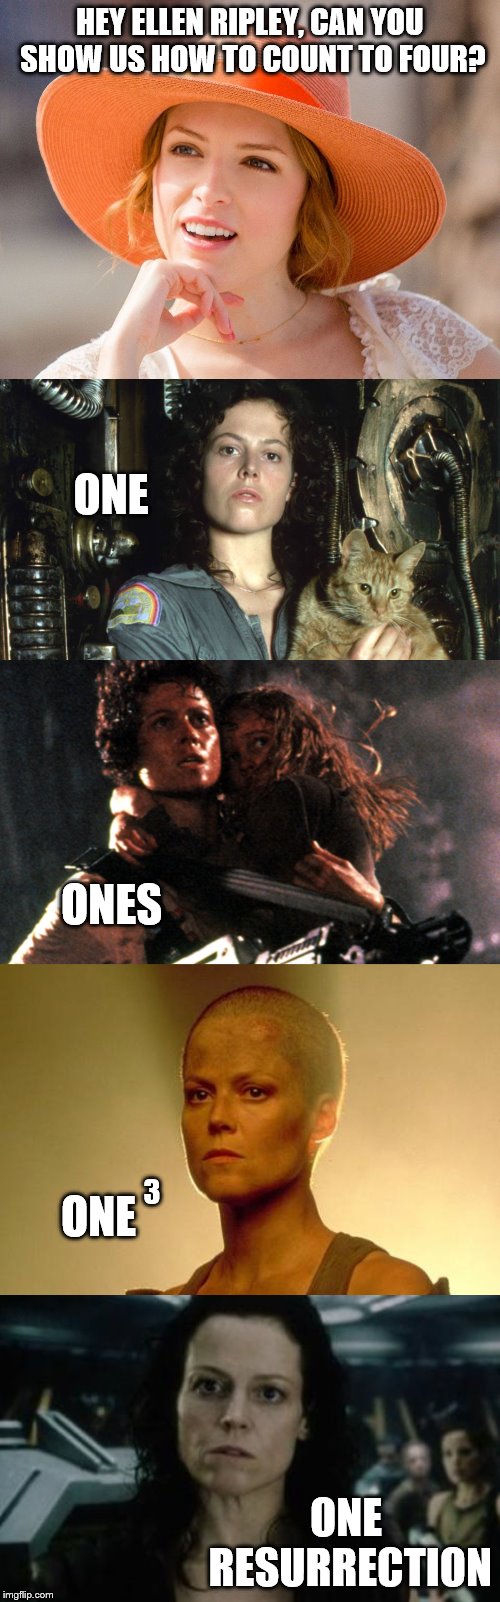 Movie franchises are so confusing | HEY ELLEN RIPLEY, CAN YOU SHOW US HOW TO COUNT TO FOUR? ONE; ONES; 3; ONE; ONE RESURRECTION | image tagged in memes,aliens,ellen ripley | made w/ Imgflip meme maker